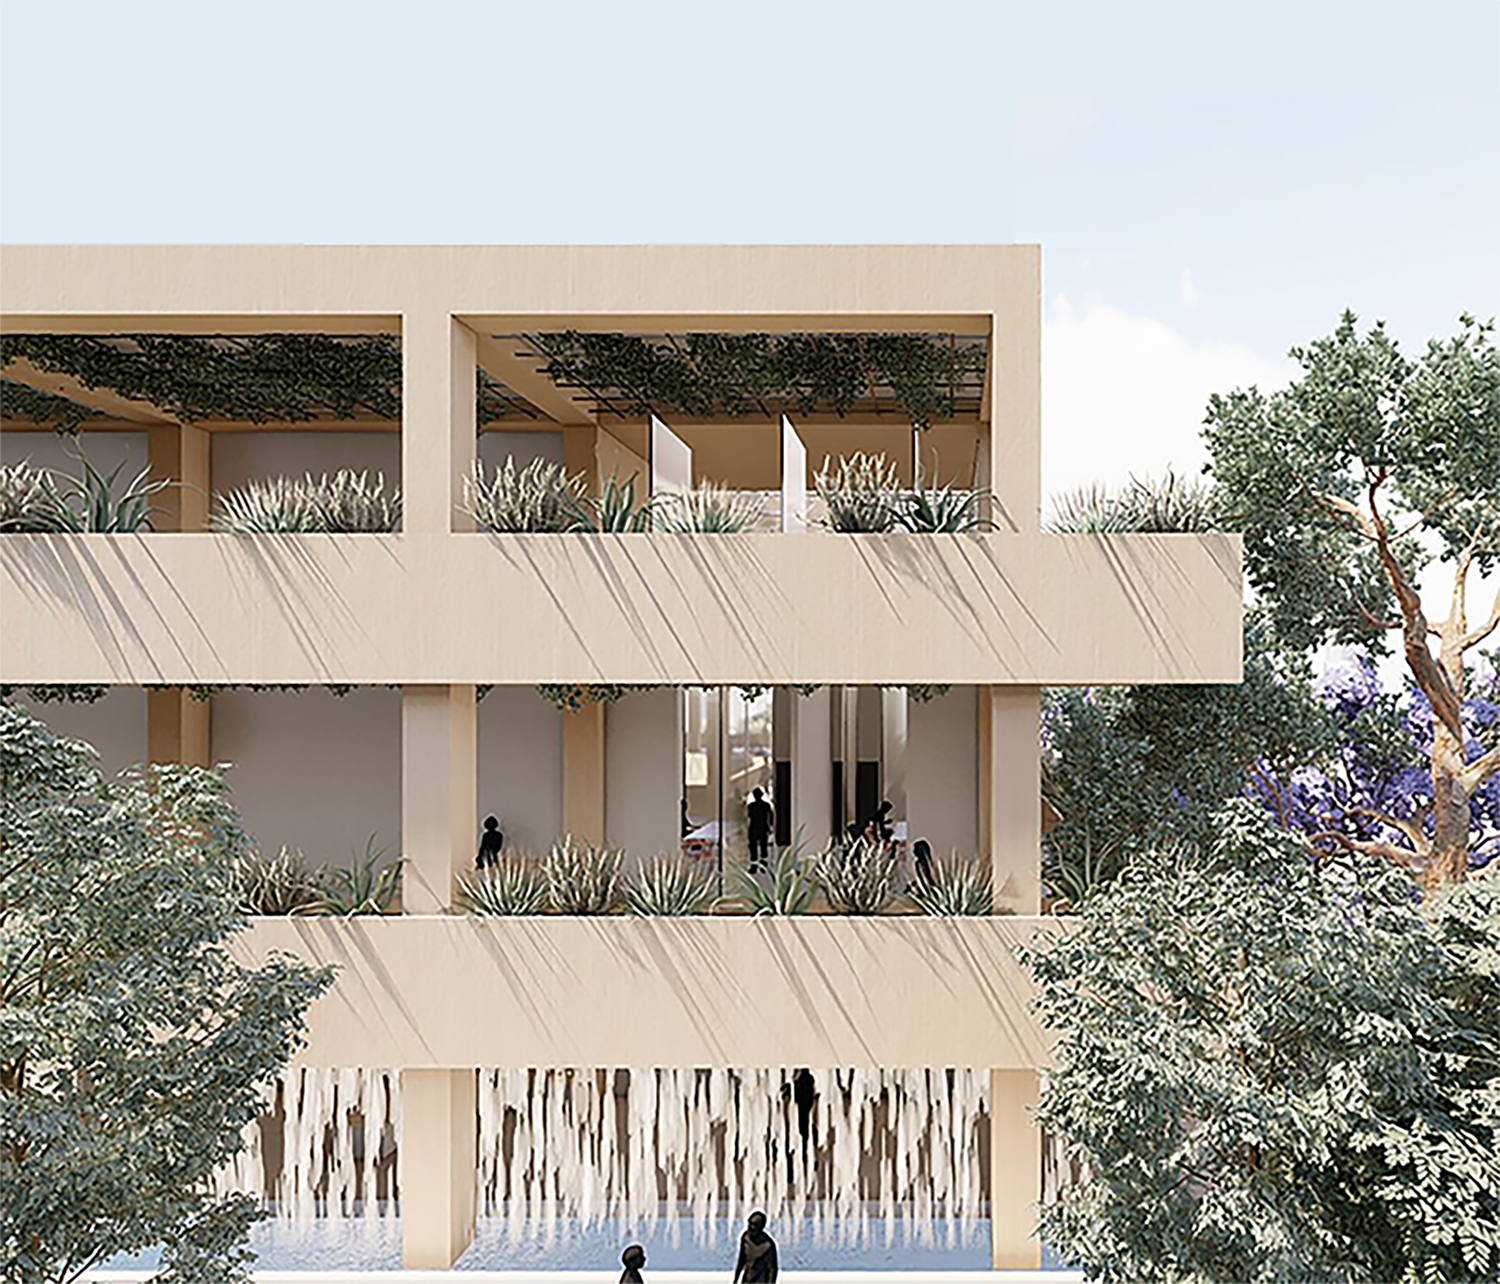 External image of the Hall of Democracy - image taken from standing on William Street. Cross Laminated Timber building surface paired with greenery and waterfalls. 